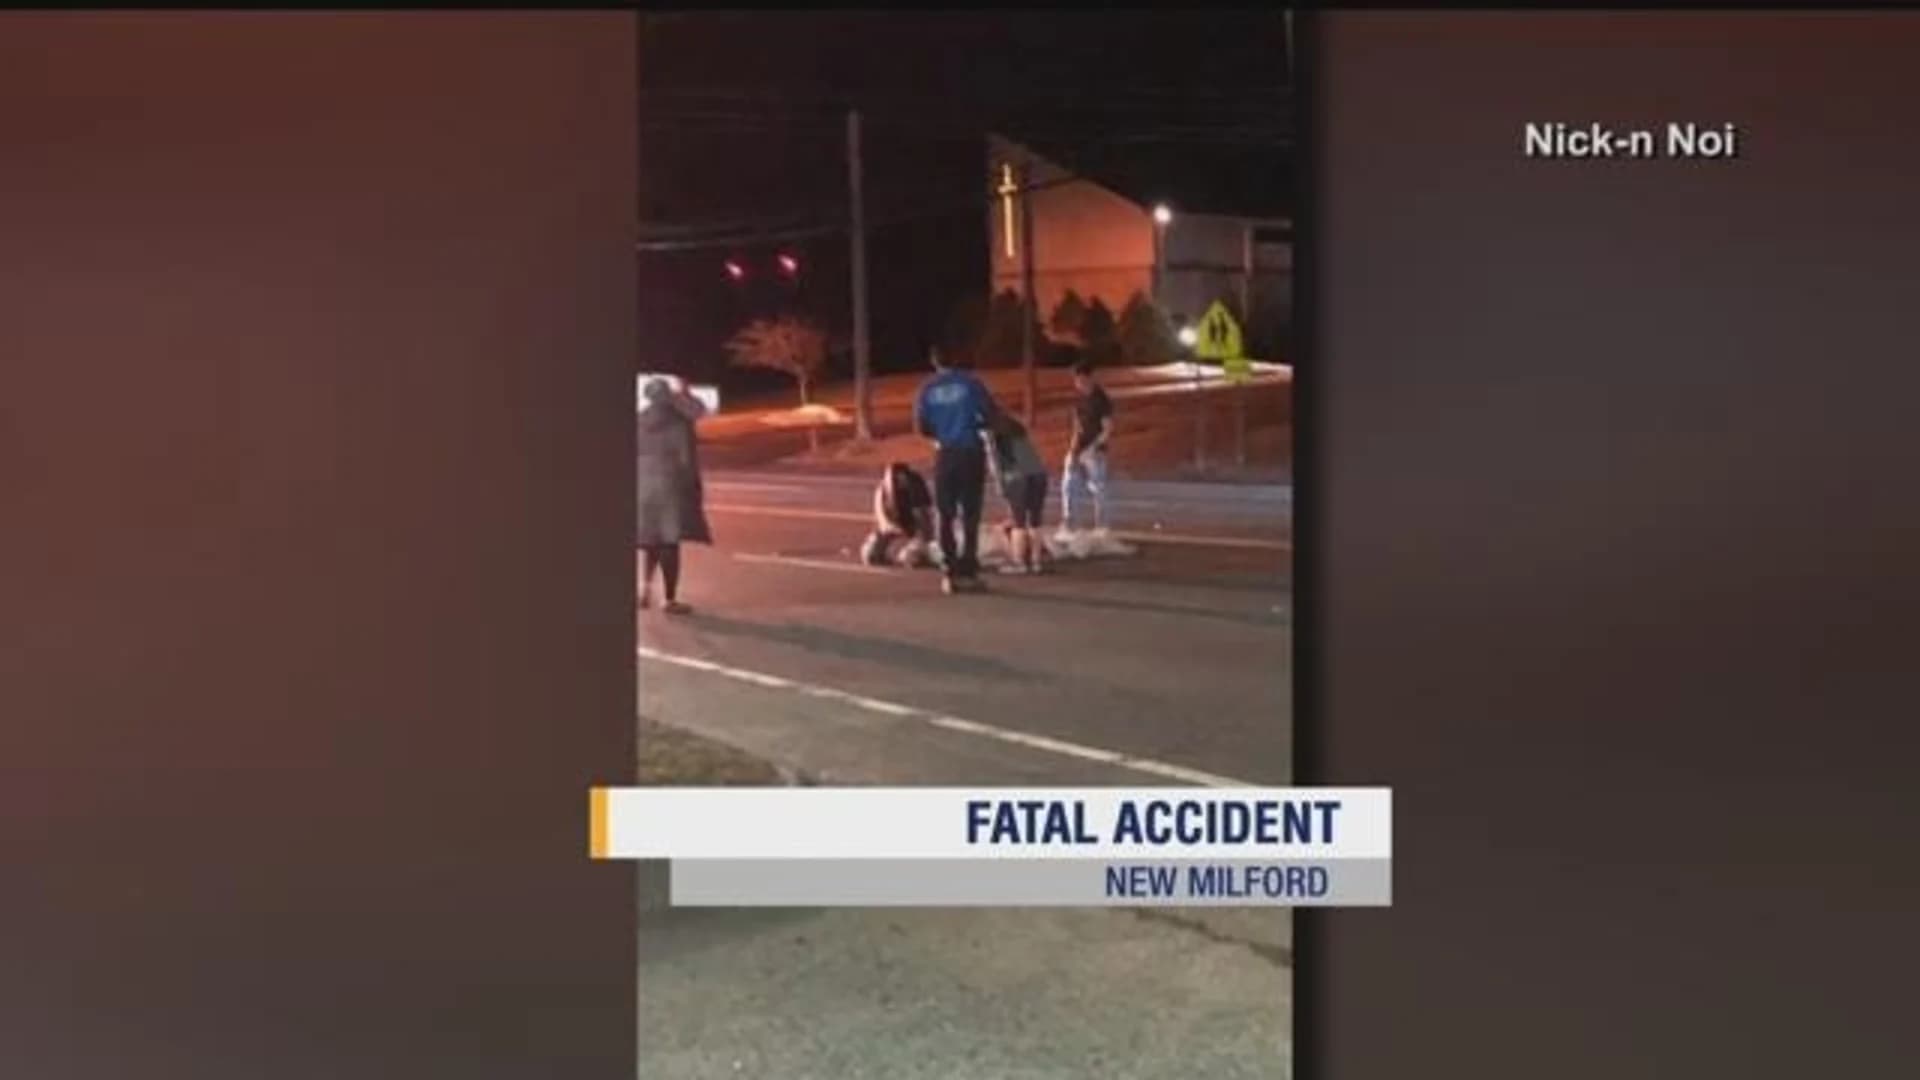 Police: 60-year-old pedestrian killed in accident, driver cooperating